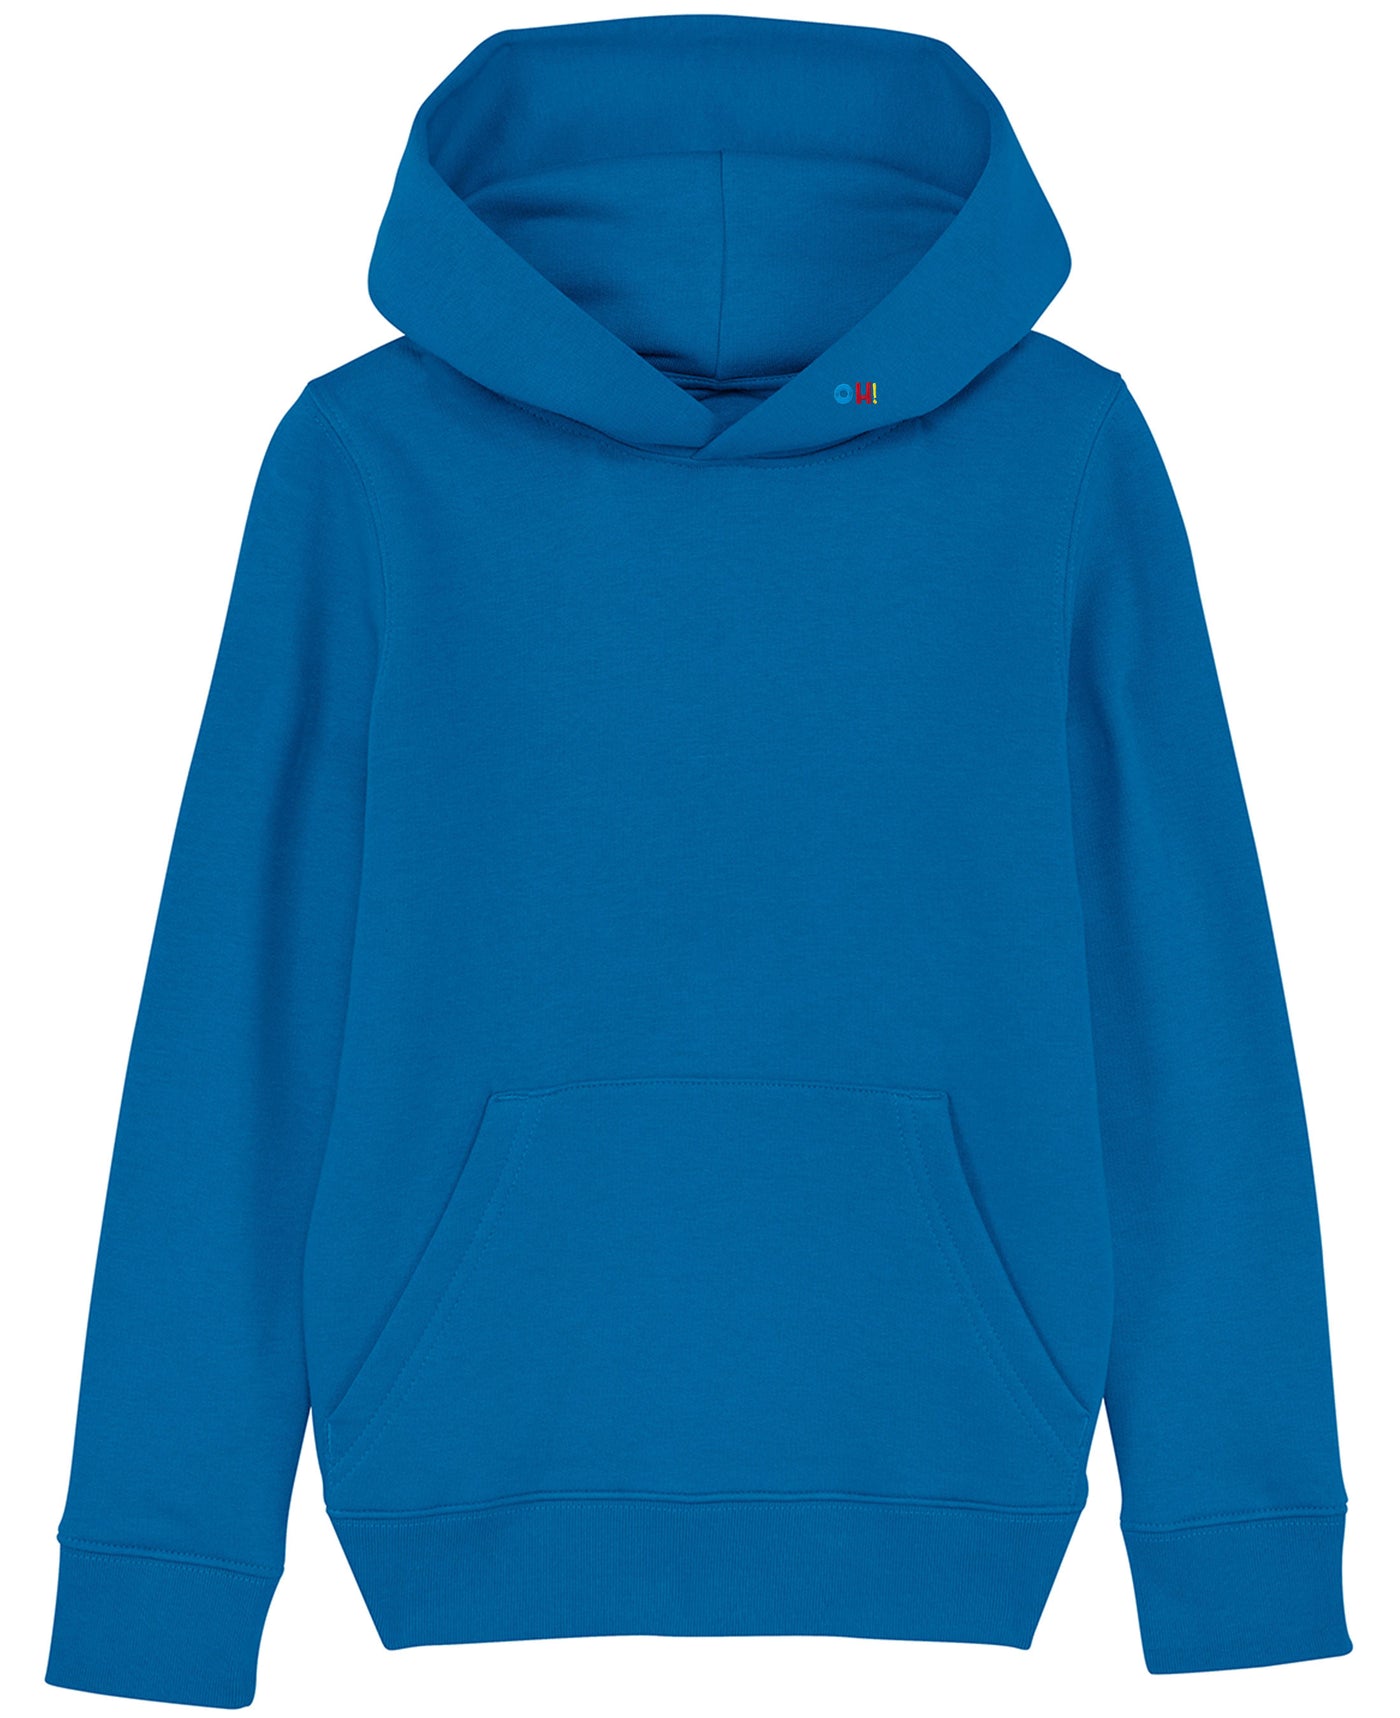 OH! Dorothy Organic Kids Pullover Hoodie - Vegan Approved / 24 Colours / 3-14 Years